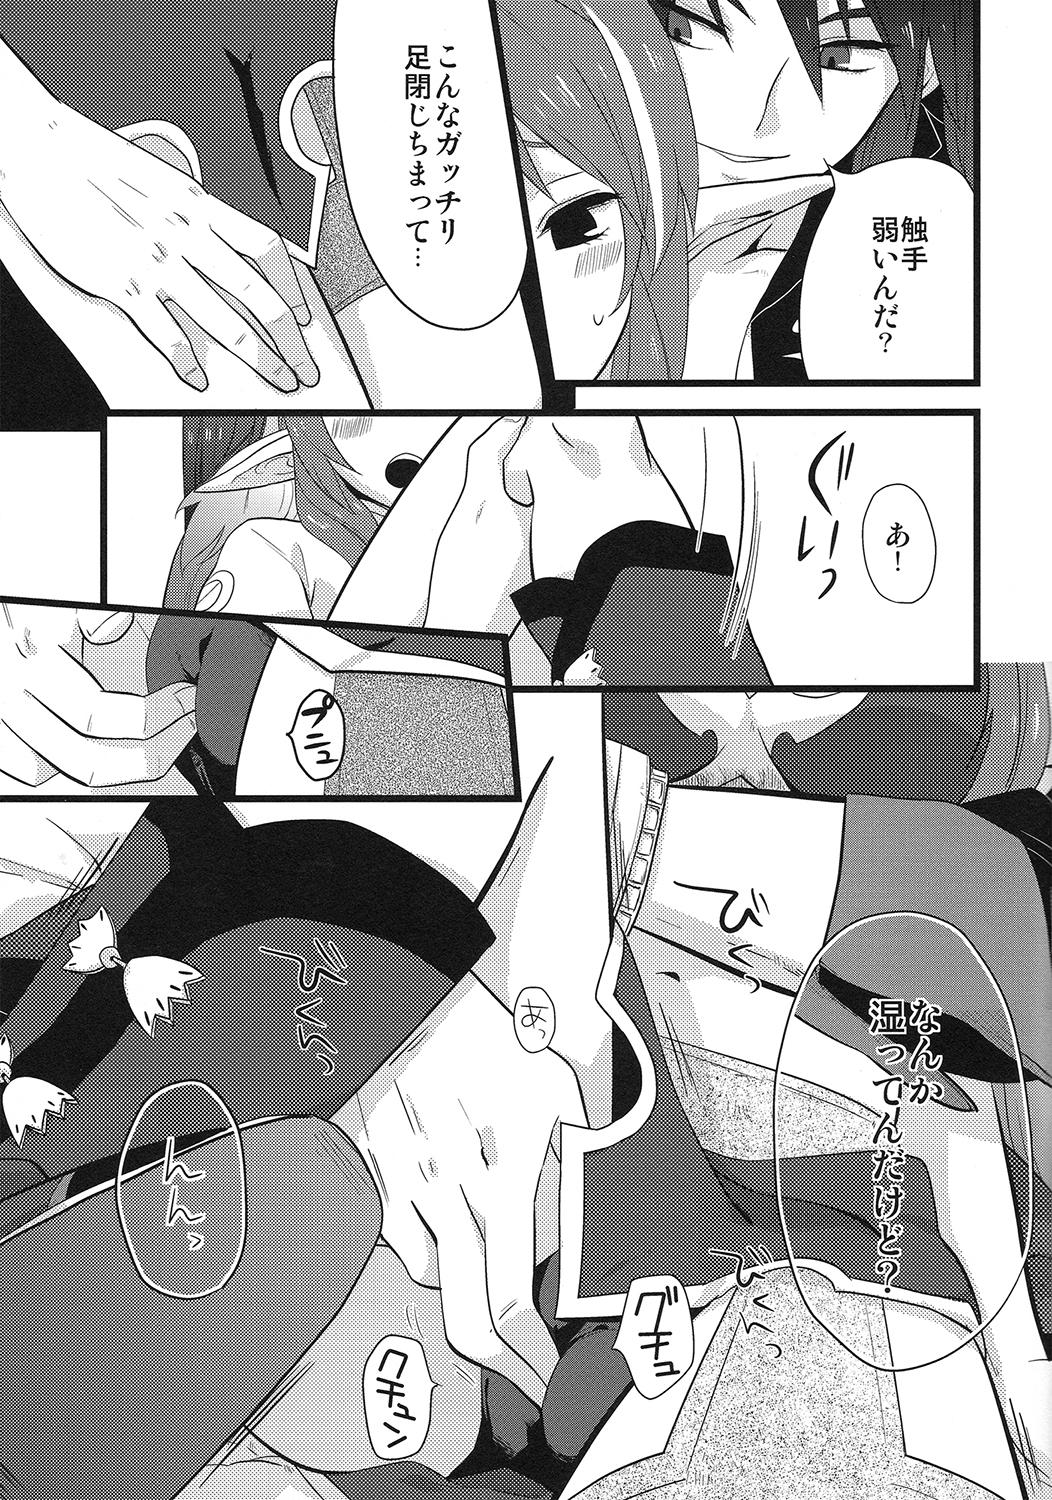 18yearsold Milk Junkie - Tales of vesperia Passion - Page 10